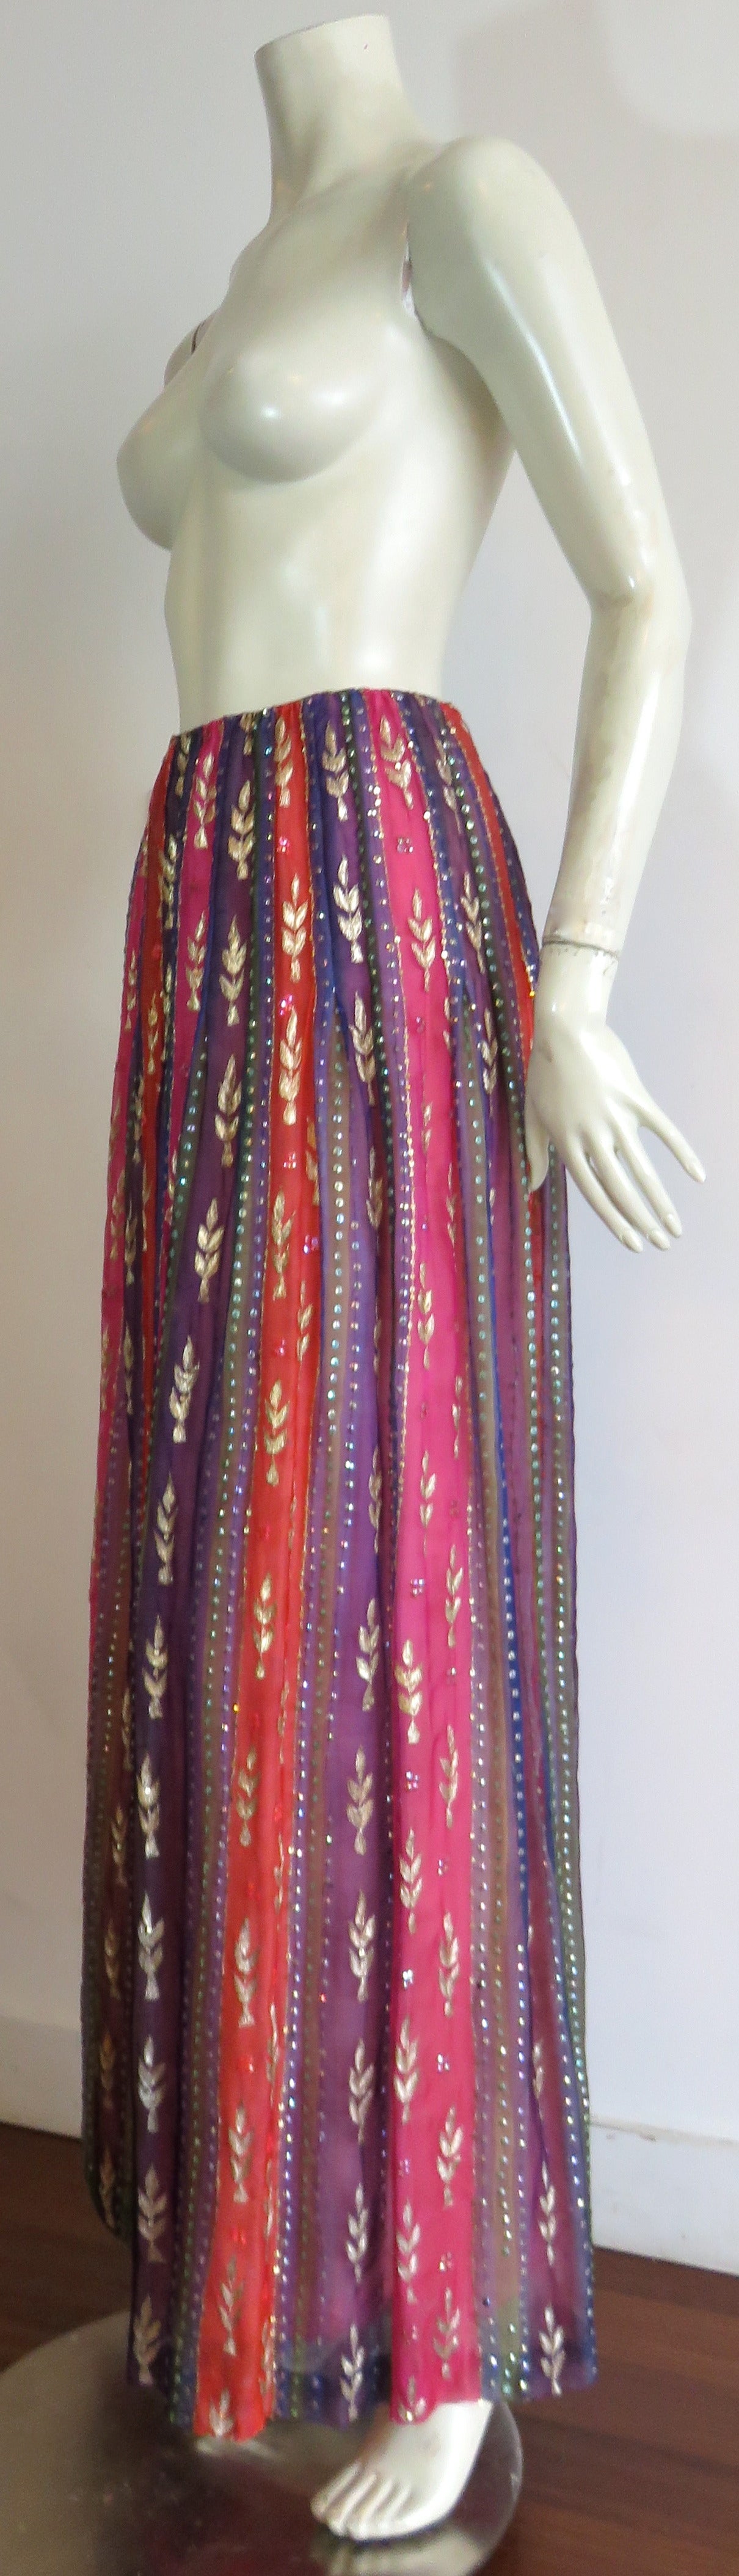 Women's 1970's GIVENCHY Haute Couture embellished silk skirt For Sale